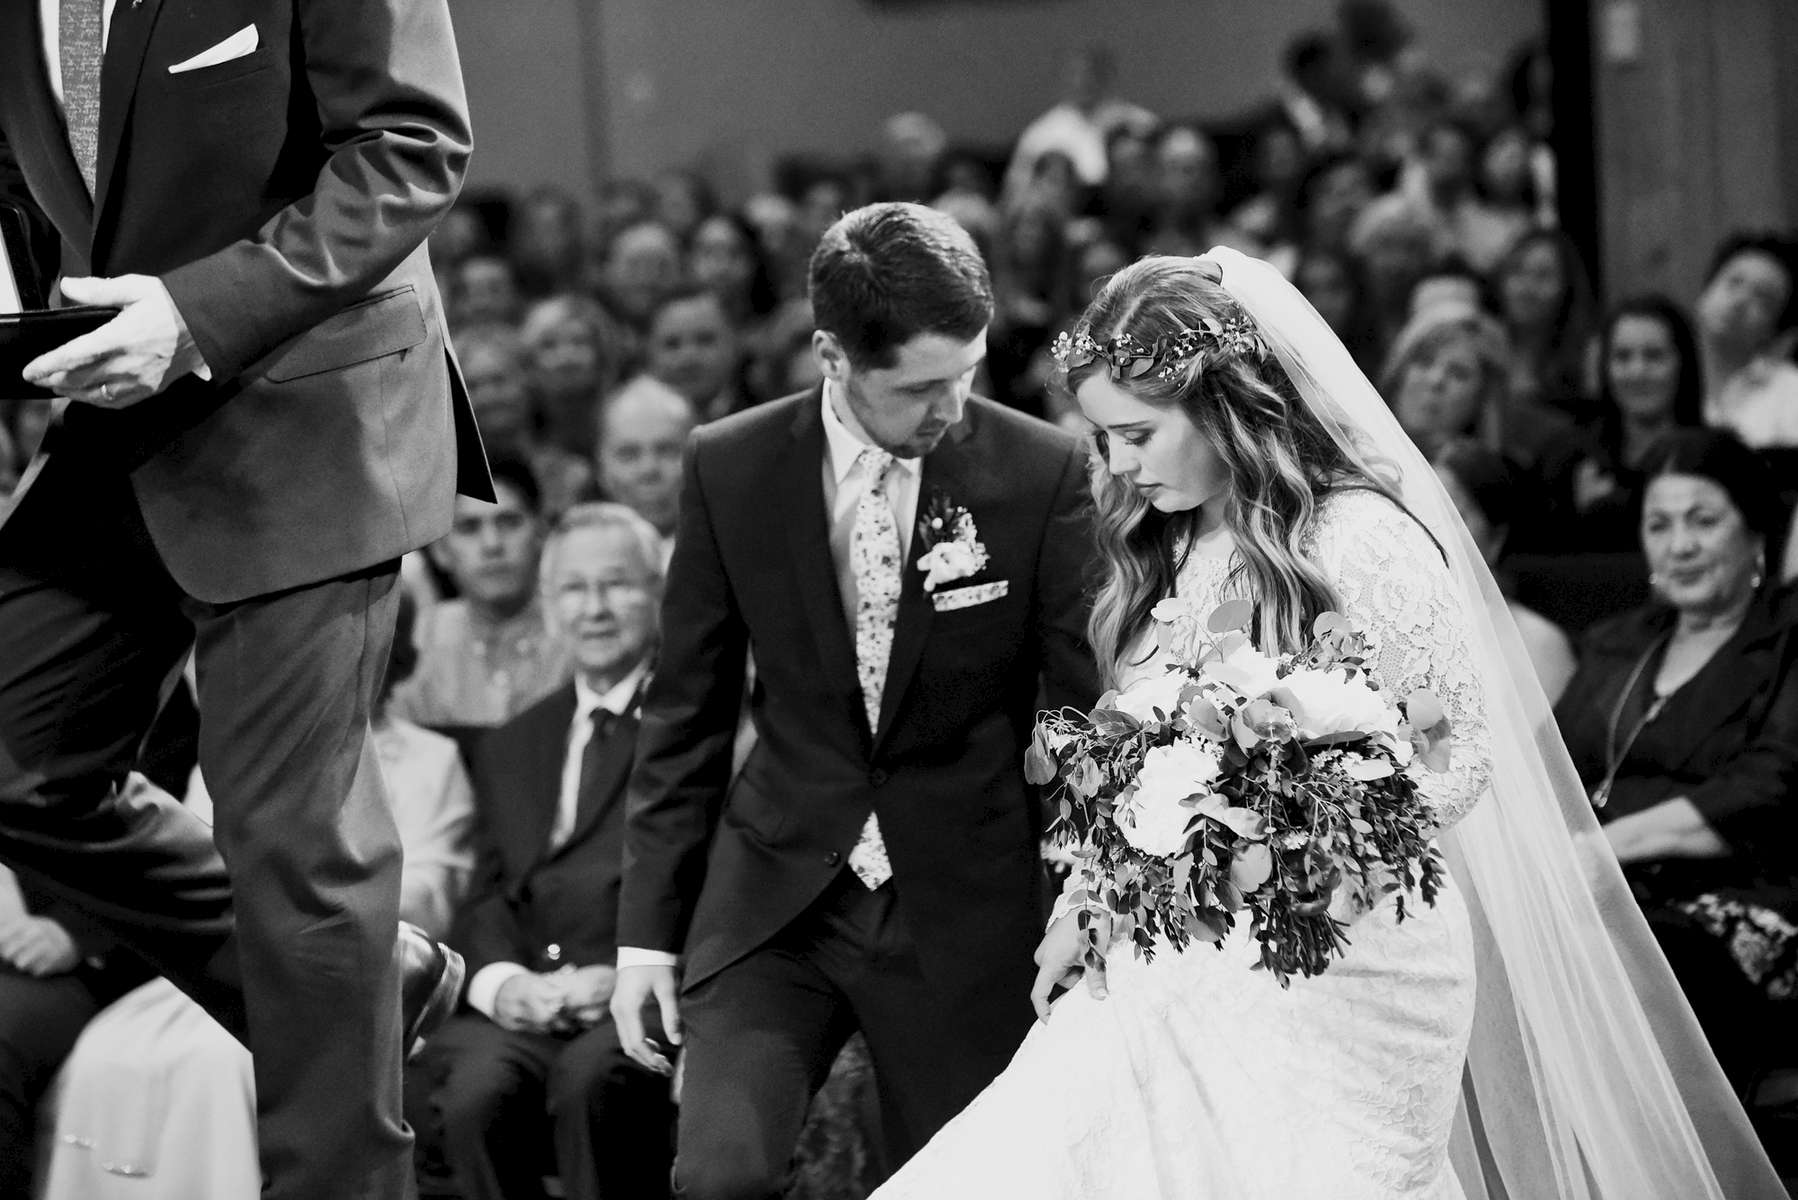 Beautiful bride, Karina Erikson, 21, marries her elementary school sweetheart, Matt Fabarez, at Compass Bible Church in Alsio Viejo, Calif., on Sunday, June 3, 2018 followed by dinner and speeches at Coto Valley Country Club in Coto De Caza, California.  The couple first and foremost follow Jesus Christ as their personal Savior and were ecstatic to celebrate their marriage with their closest friends and family.  The church members of about 600 people, witnessed their Lead Paster Mike Fabarez marry his son and daughter in law. The tear-filled speeches, mother of the bride's gift to her daughter, first look, and sparkler exit were a few of the cherished moments during the Fabarez Wedding.(Photo by: Meagan Reidinger © 2018)